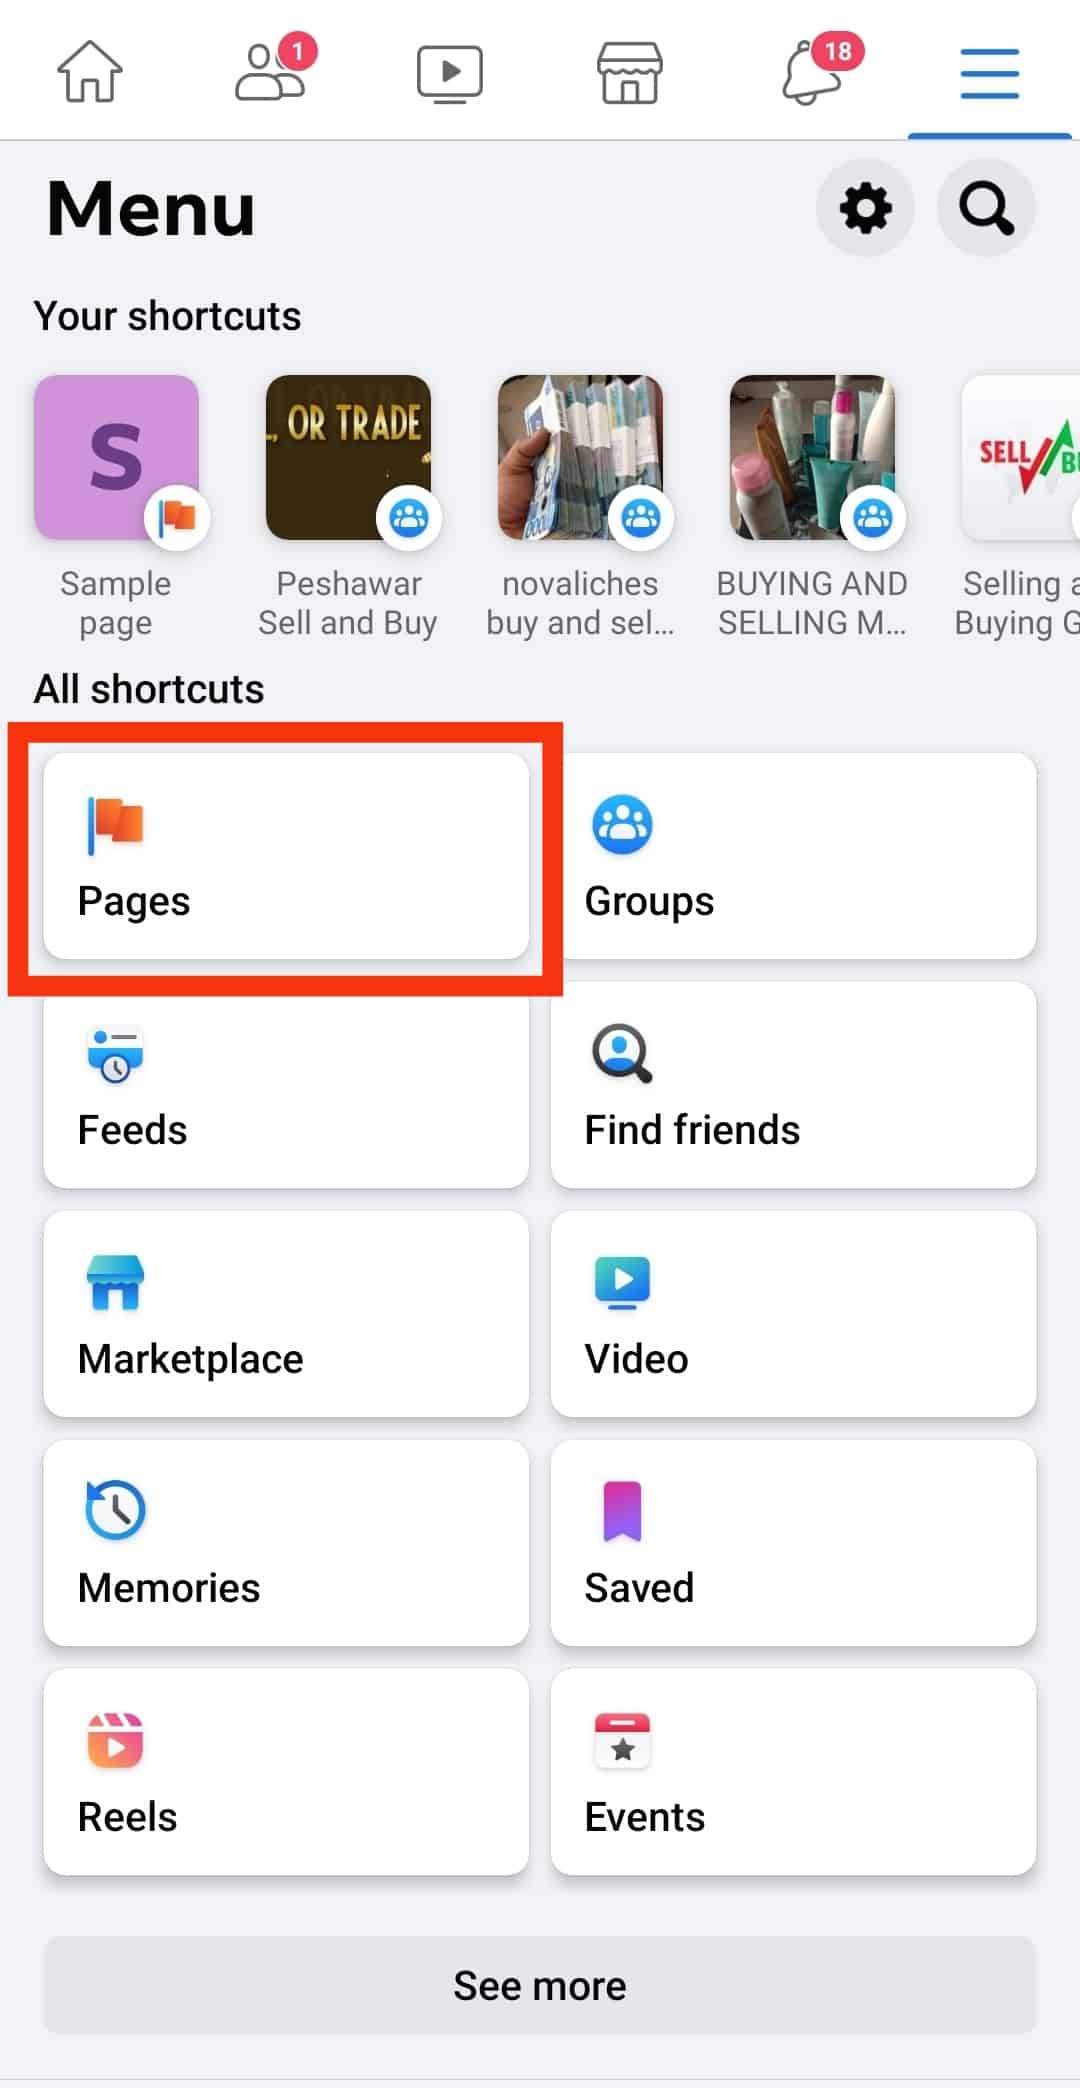 Select Pages.